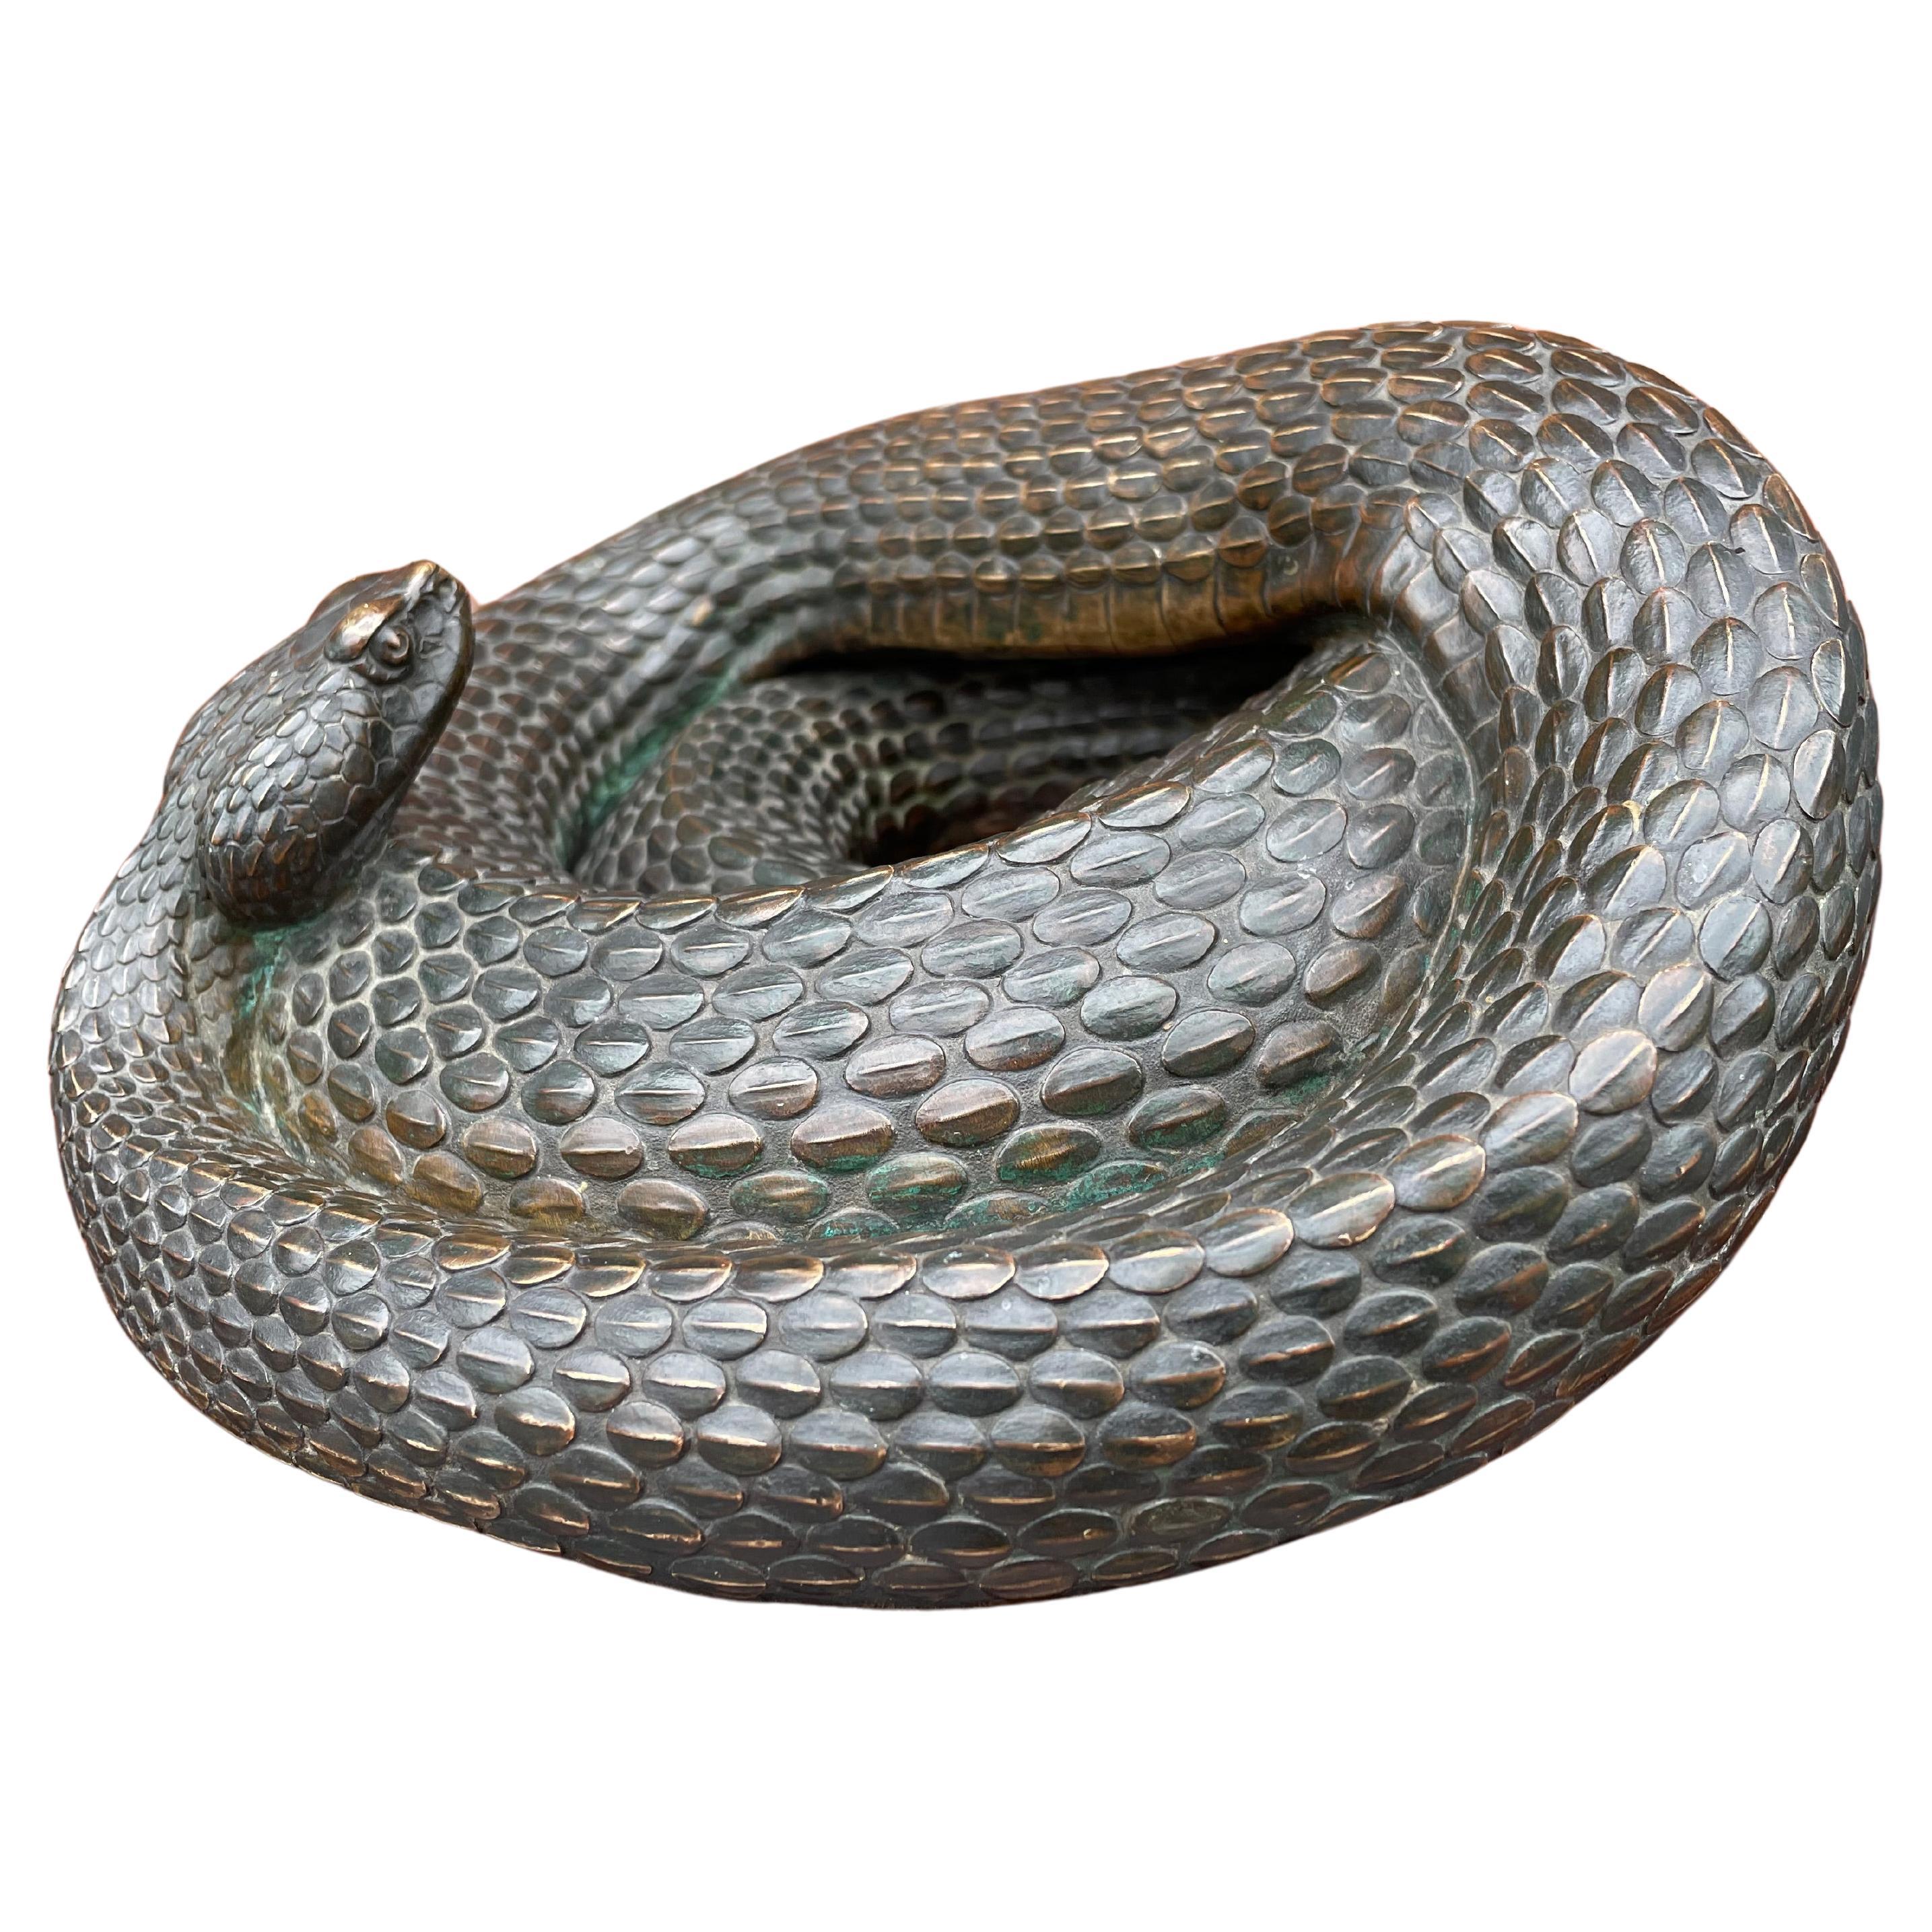 Museum Worthy Antique Bronze Coiled Rattlesnake Sculpture Signed & Marked 1885  For Sale